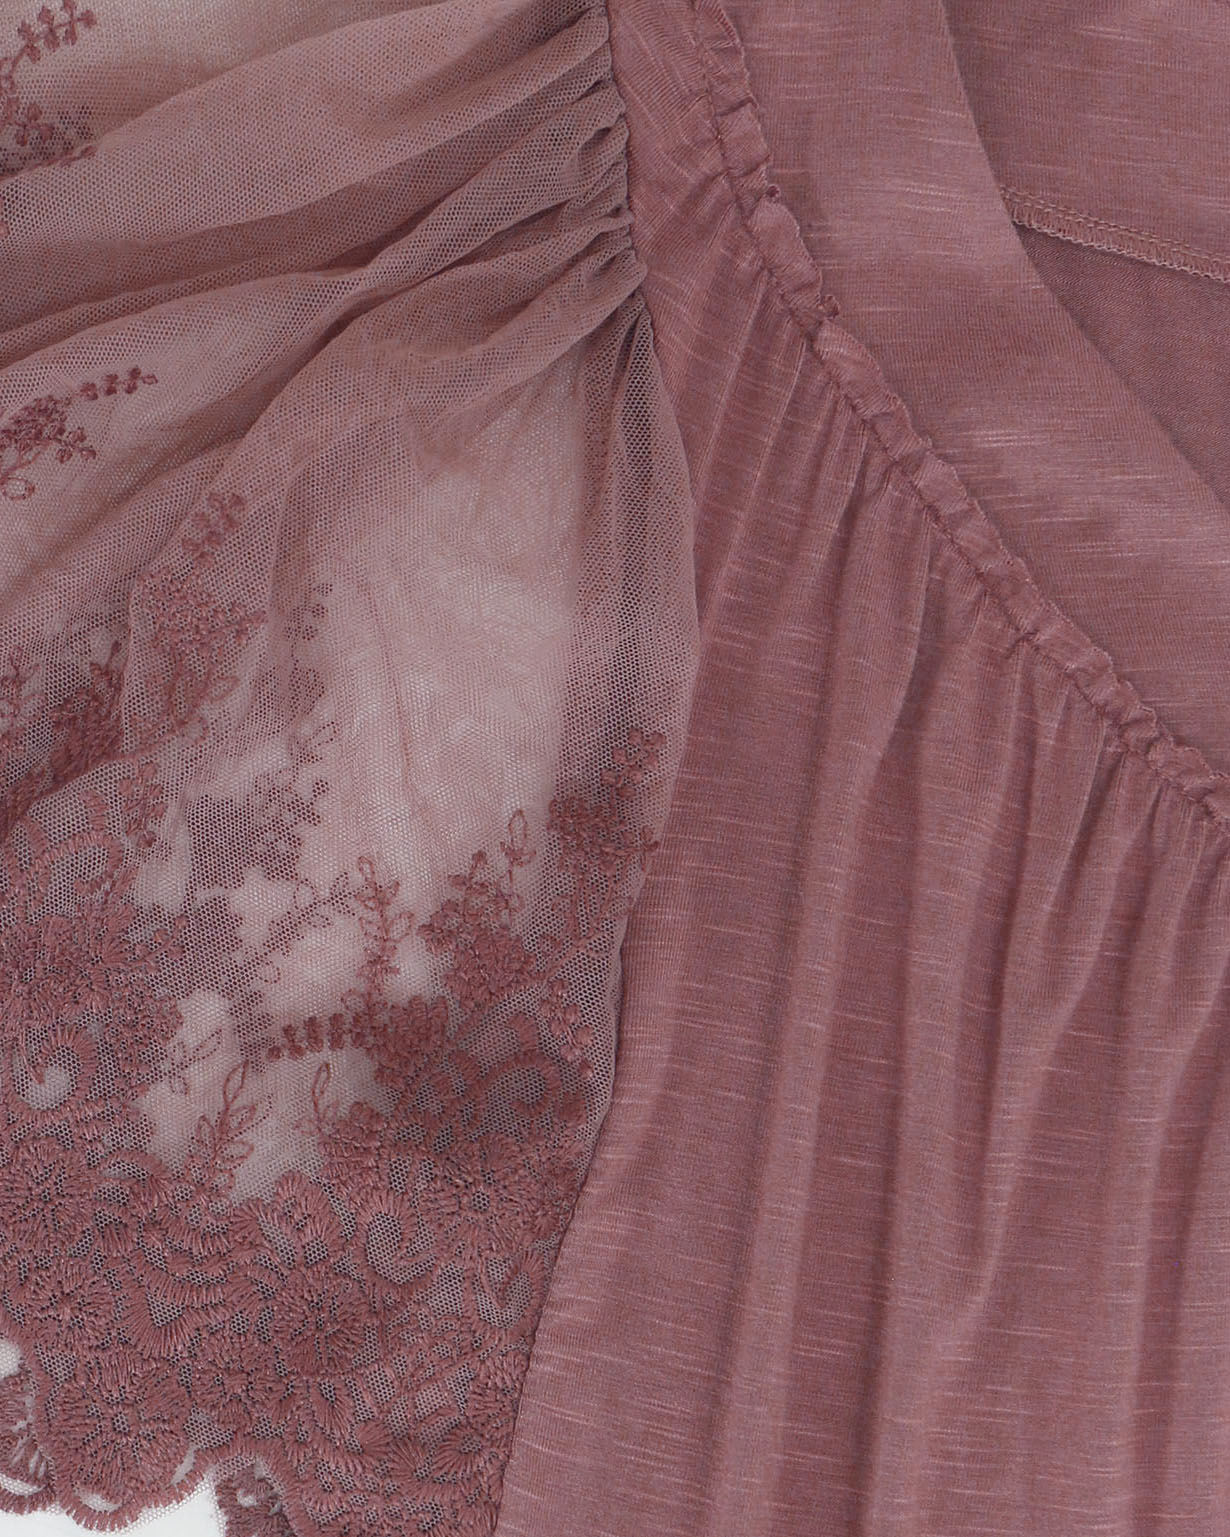 detail view of rose dawn sable lace sleeve top